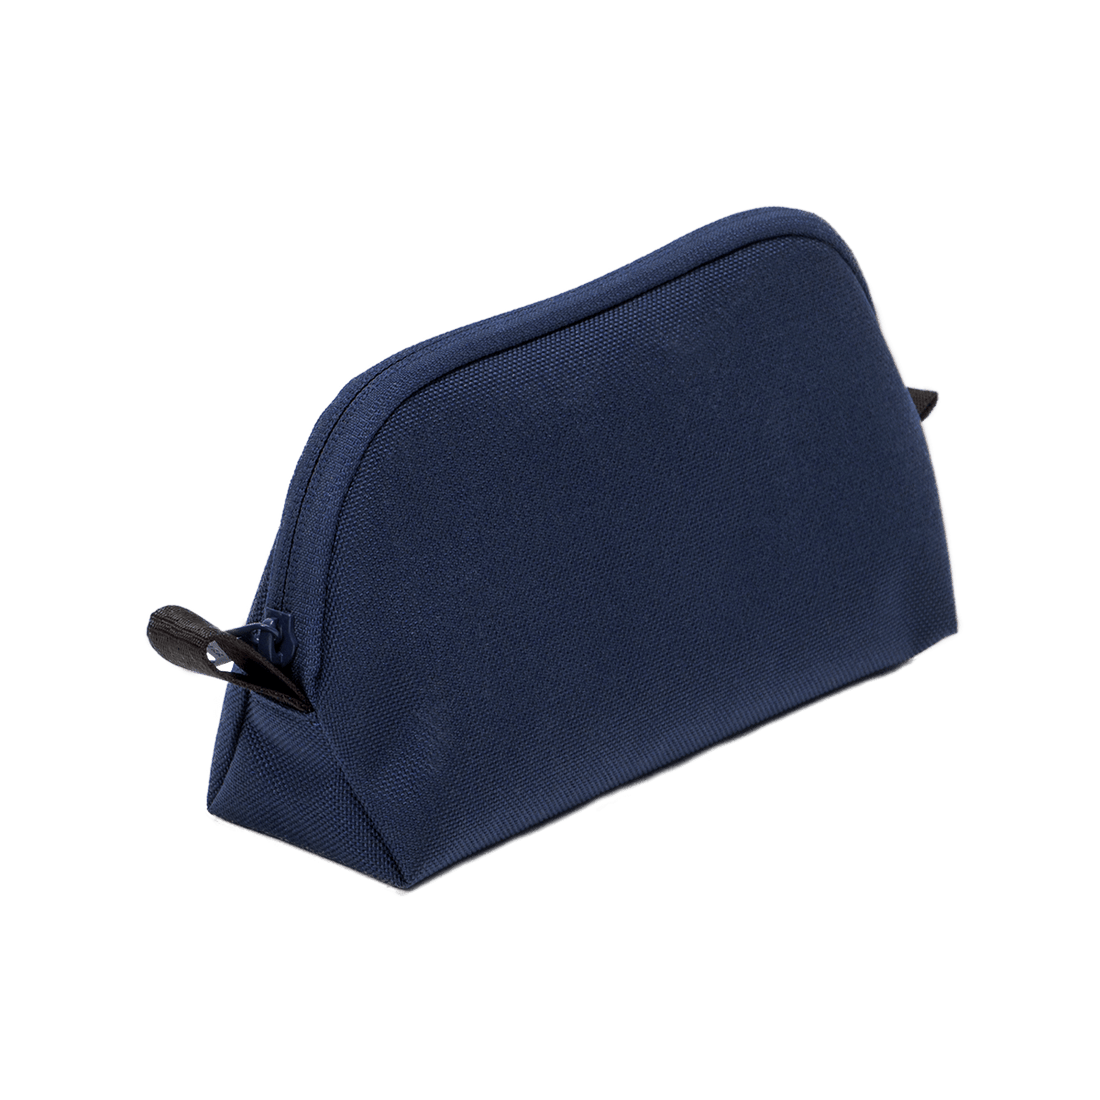 64 oz Sleeve / Pouch with Paracord Survival Carrying Handle (Blue) –  Highland Peak Co.